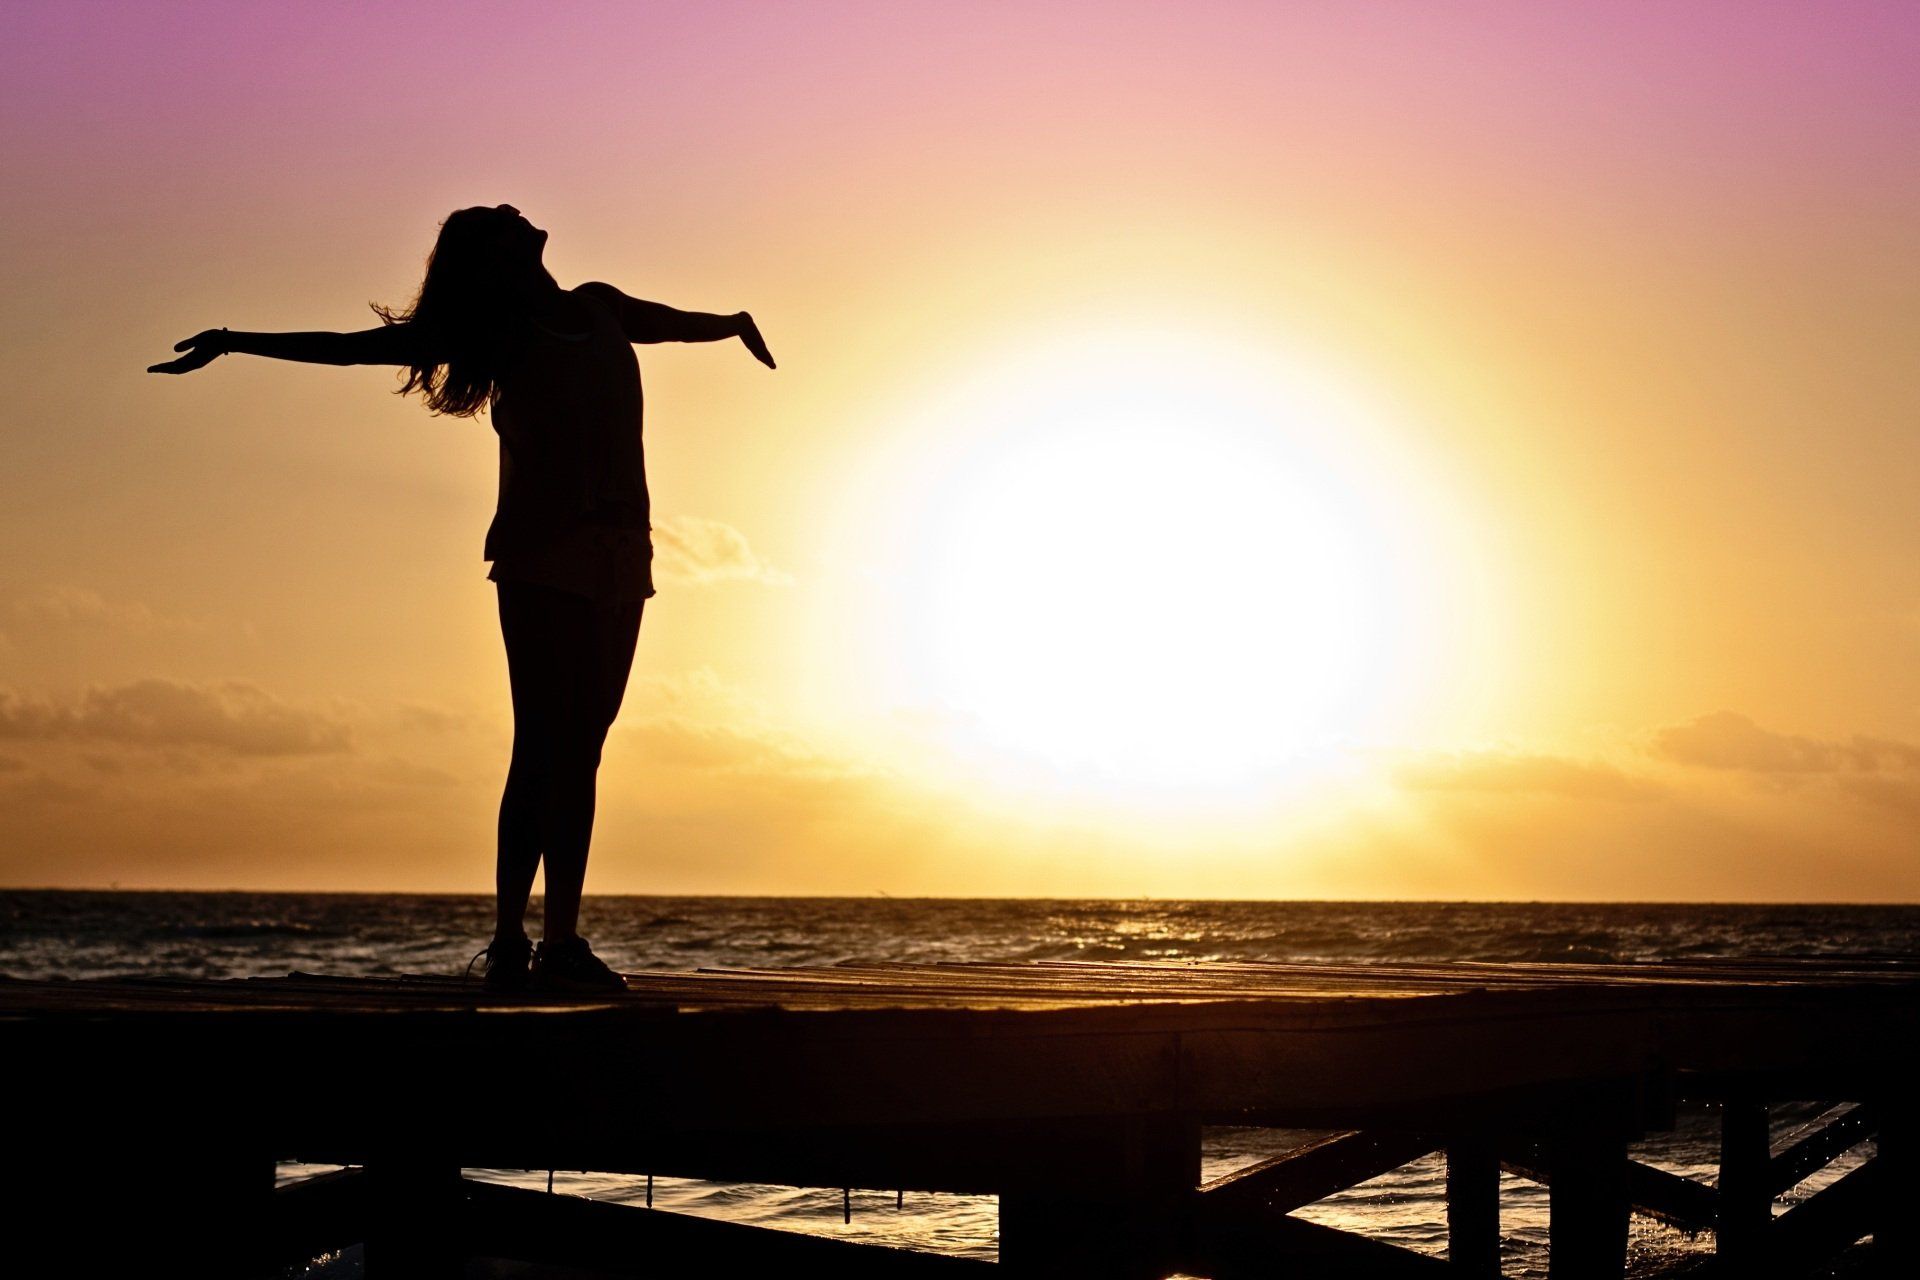 Home Buyers is standing on a pier with her arms outstretched at sunset.